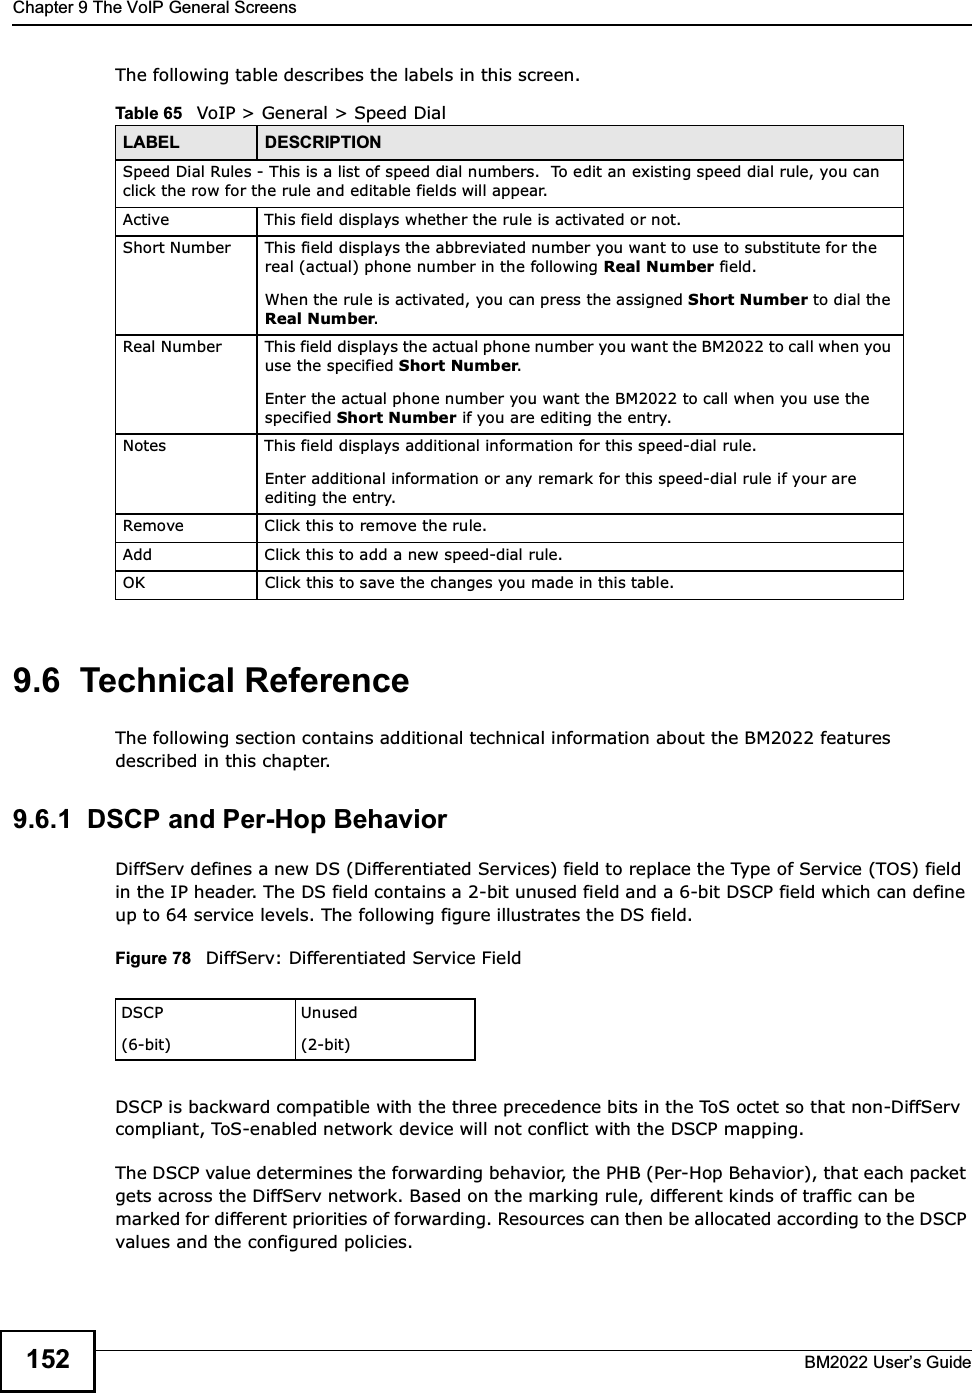 Chapter 9 The VoIP General ScreensBM2022 Users Guide152The following table describes the labels in this screen.  9.6  Technical ReferenceThe following section contains additional technical information about the BM2022 features described in this chapter.9.6.1  DSCP and Per-Hop Behavior DiffServ defines a new DS (Differentiated Services) field to replace the Type of Service (TOS) field in the IP header. The DS field contains a 2-bit unused field and a 6-bit DSCP field which can define up to 64 service levels. The following figure illustrates the DS field. Figure 78   DiffServ: Differentiated Service FieldDSCP is backward compatible with the three precedence bits in the ToS octet so that non-DiffServ compliant, ToS-enabled network device will not conflict with the DSCP mapping. The DSCP value determines the forwarding behavior, the PHB (Per-Hop Behavior), that each packet gets across the DiffServ network. Based on the marking rule, different kinds of traffic can be marked for different priorities of forwarding. Resources can then be allocated according to the DSCP values and the configured policies.Table 65   VoIP &gt; General &gt; Speed DialLABEL DESCRIPTIONSpeed Dial Rules - This is a list of speed dial numbers.  To edit an existing speed dial rule, you can click the row for the rule and editable fields will appear.Active This field displays whether the rule is activated or not.Short Number This field displays the abbreviated number you want to use to substitute for the real (actual) phone number in the following Real Number field. When the rule is activated, you can press the assigned Short Number to dial the Real Number.Real Number This field displays the actual phone number you want the BM2022 to call when you use the specified Short Number.Enter the actual phone number you want the BM2022 to call when you use the specified Short Number if you are editing the entry.Notes This field displays additional information for this speed-dial rule.Enter additional information or any remark for this speed-dial rule if your are editing the entry.Remove Click this to remove the rule.Add Click this to add a new speed-dial rule.OK Click this to save the changes you made in this table.DSCP(6-bit)Unused(2-bit)